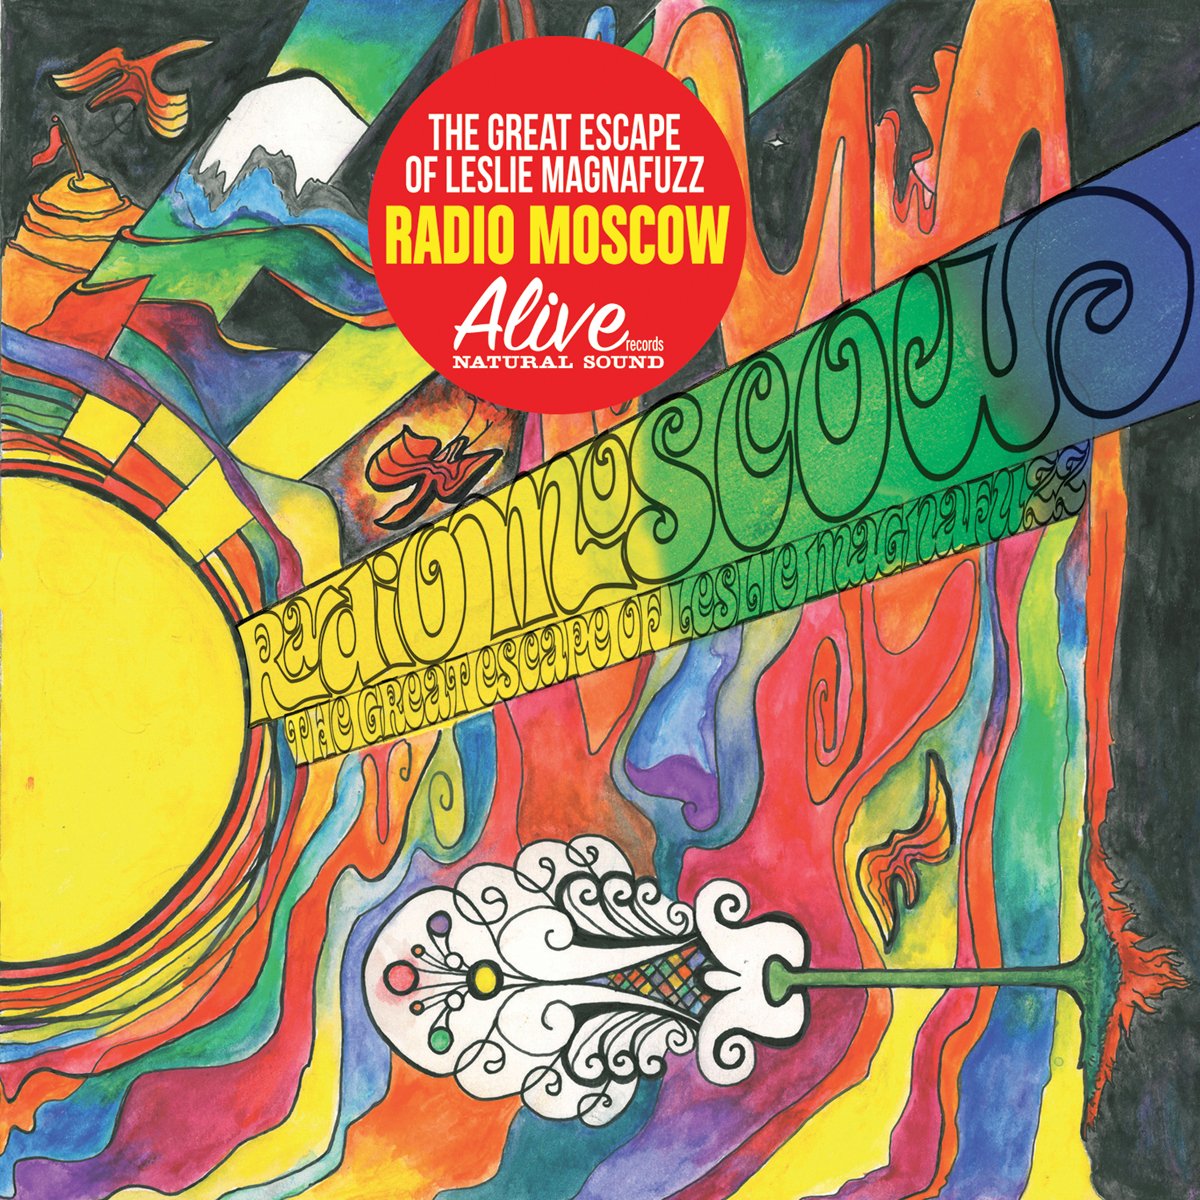 RADIO MOSCOW – GREAT ESCAPE OF LESLIE MAGNAFUZZ LP